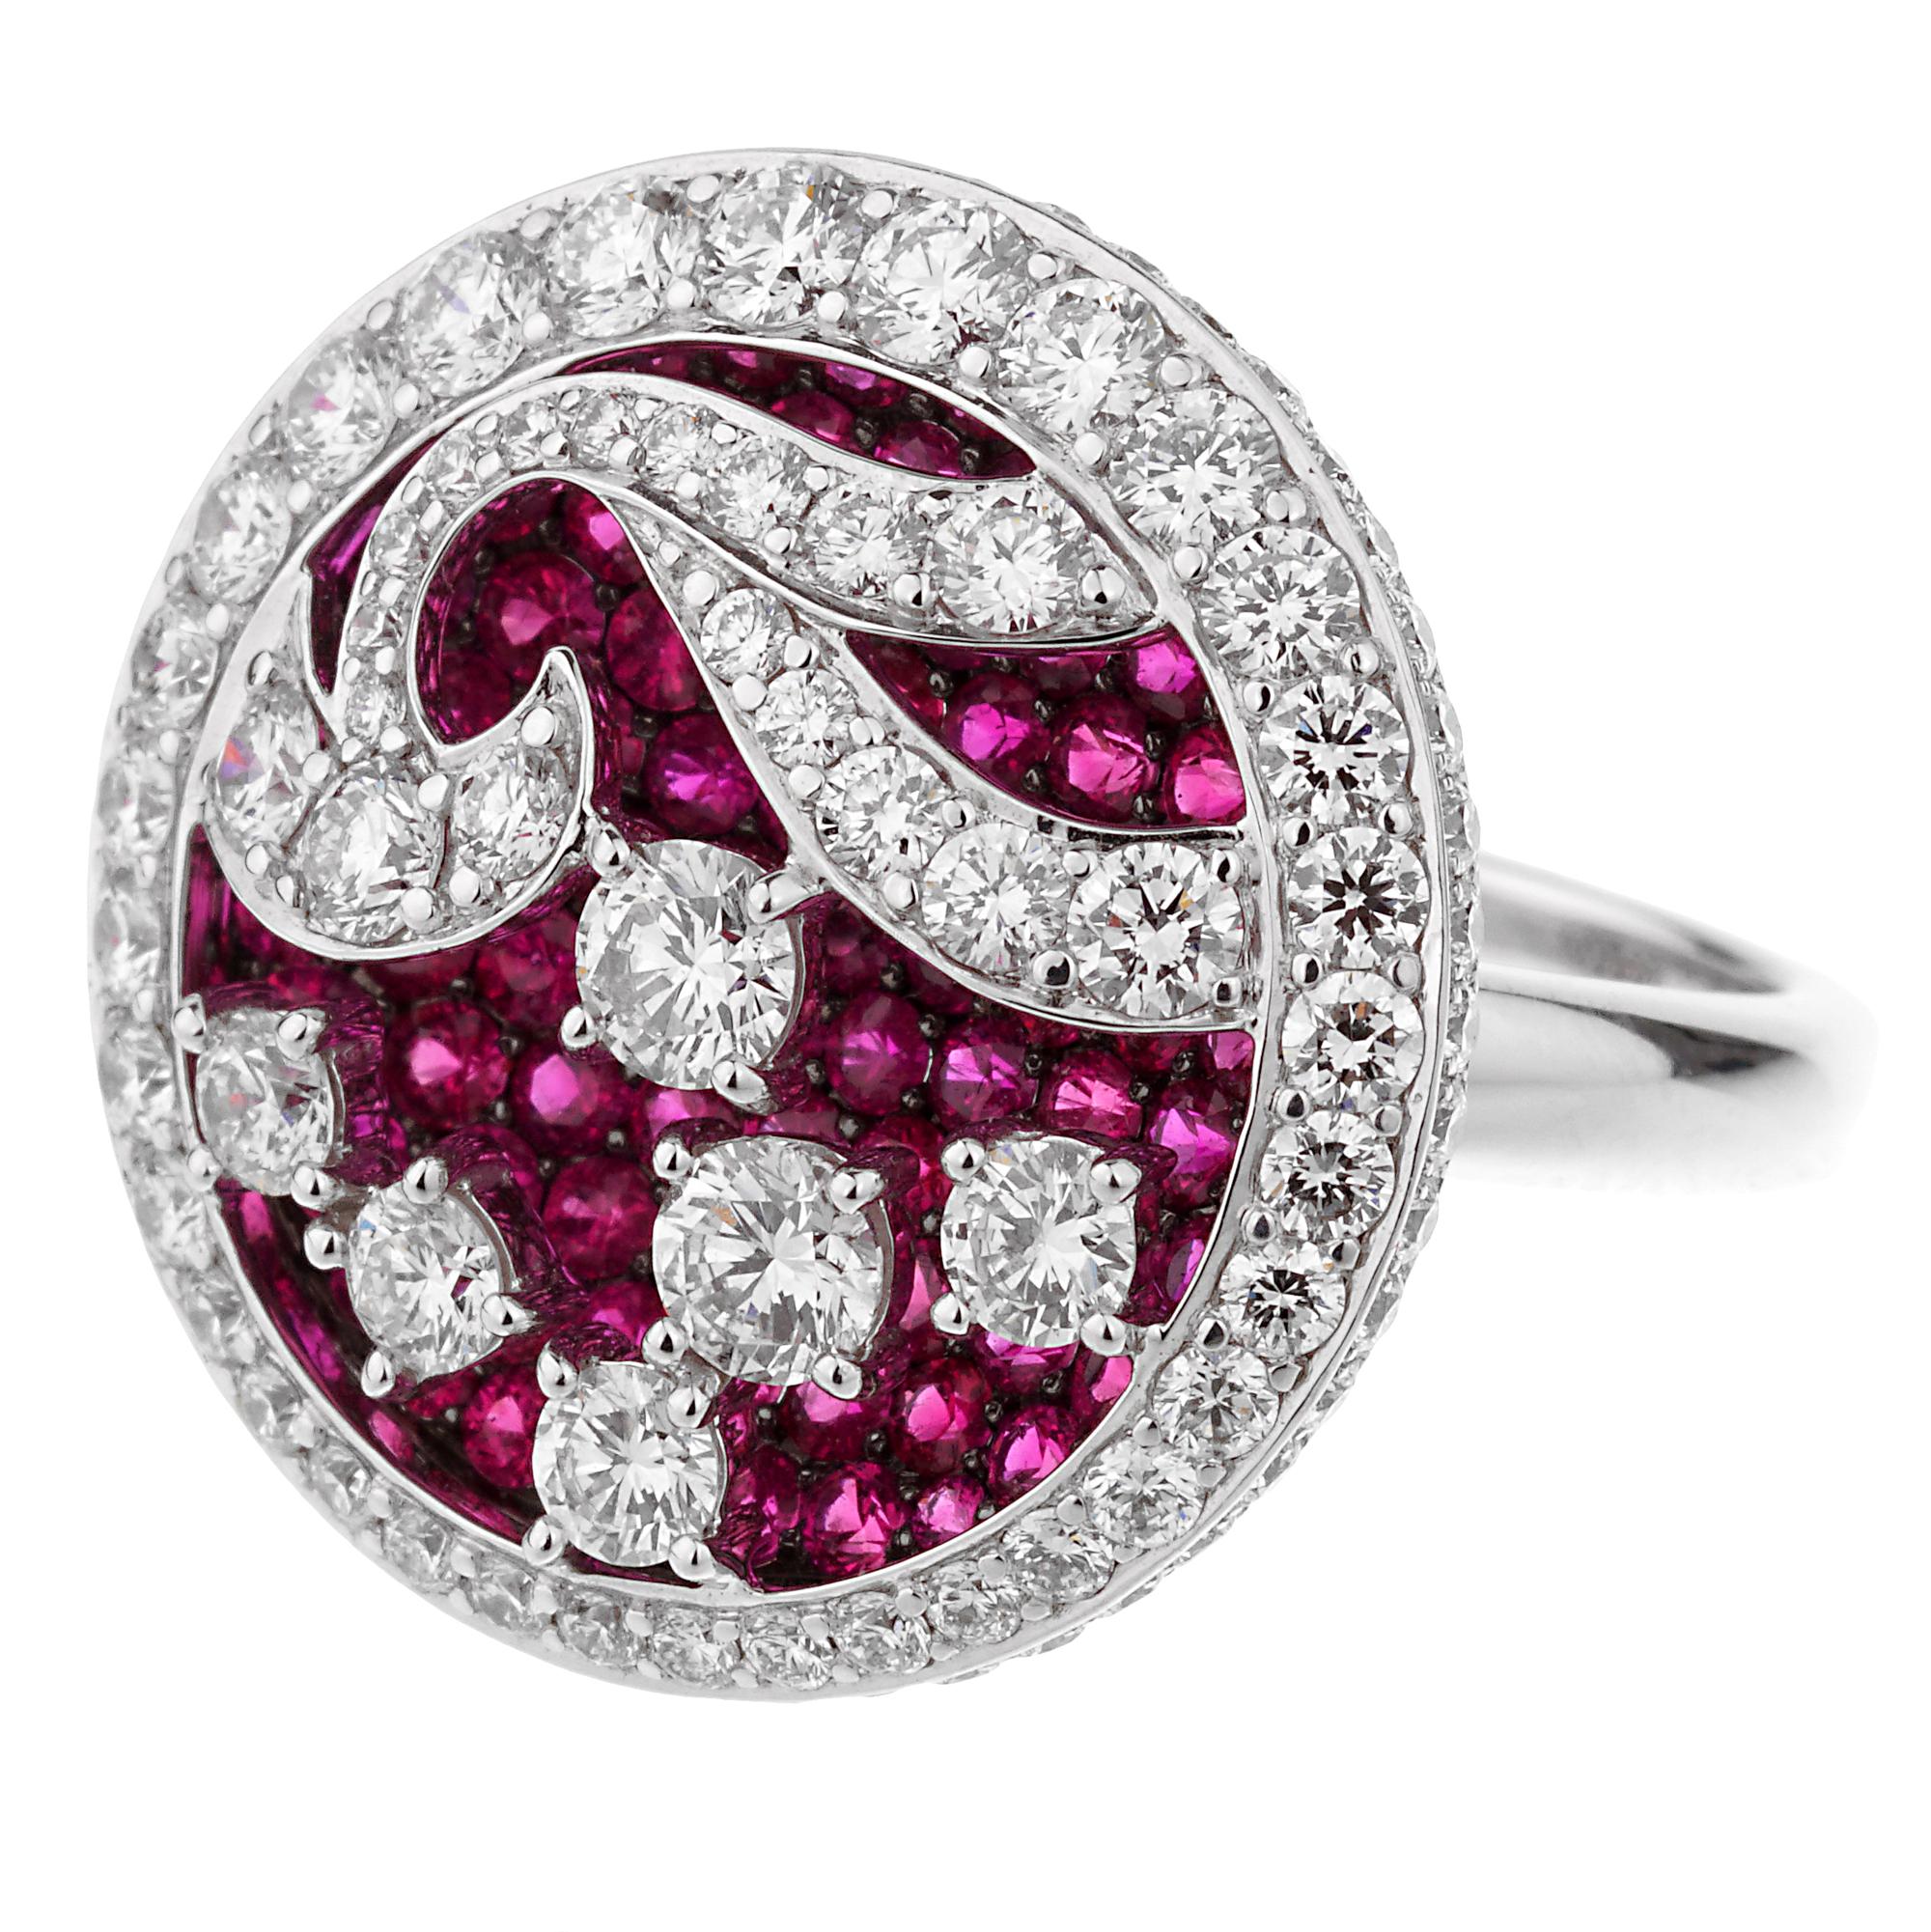 A magnificent Graff cocktail ring showcasing 2.30cts of the finest round brilliant cut diamonds atop of 2.37ct of rubies set in 18k white gold. The ring measures a size 5 3/4 and can be resized if needed.

Opulent Jewelers Sku: 2673